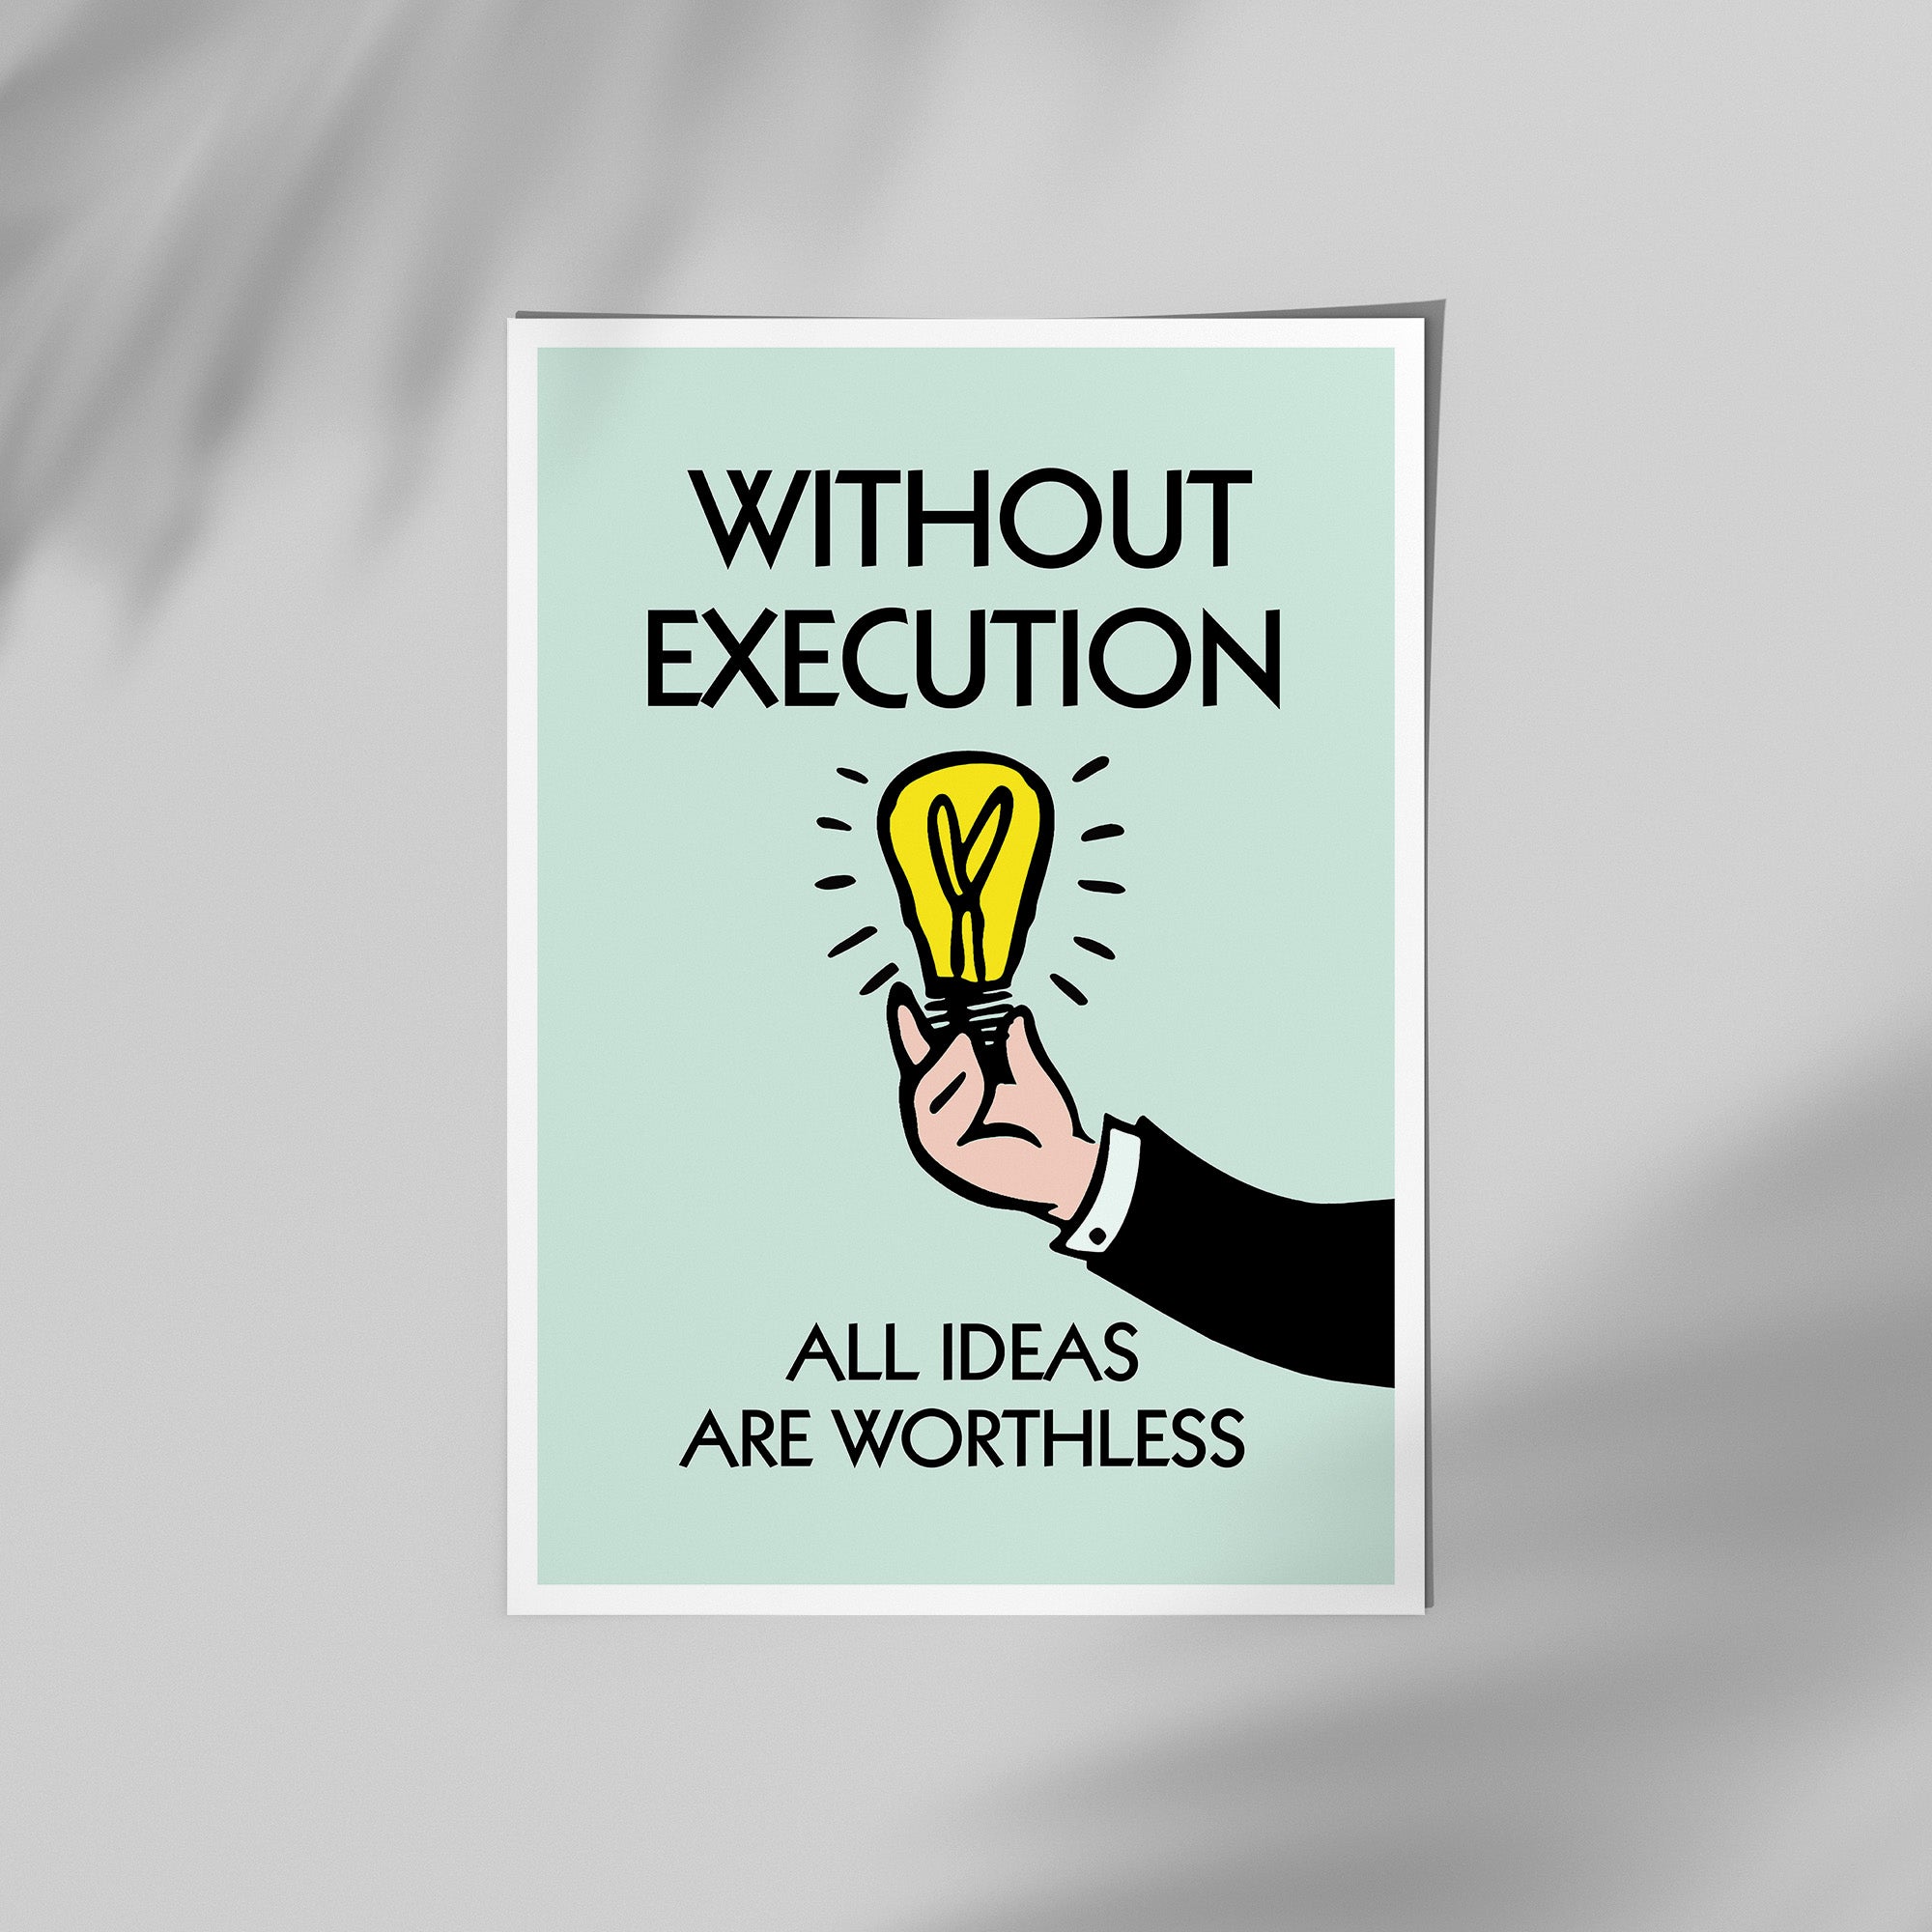 Ideas Are Worthless